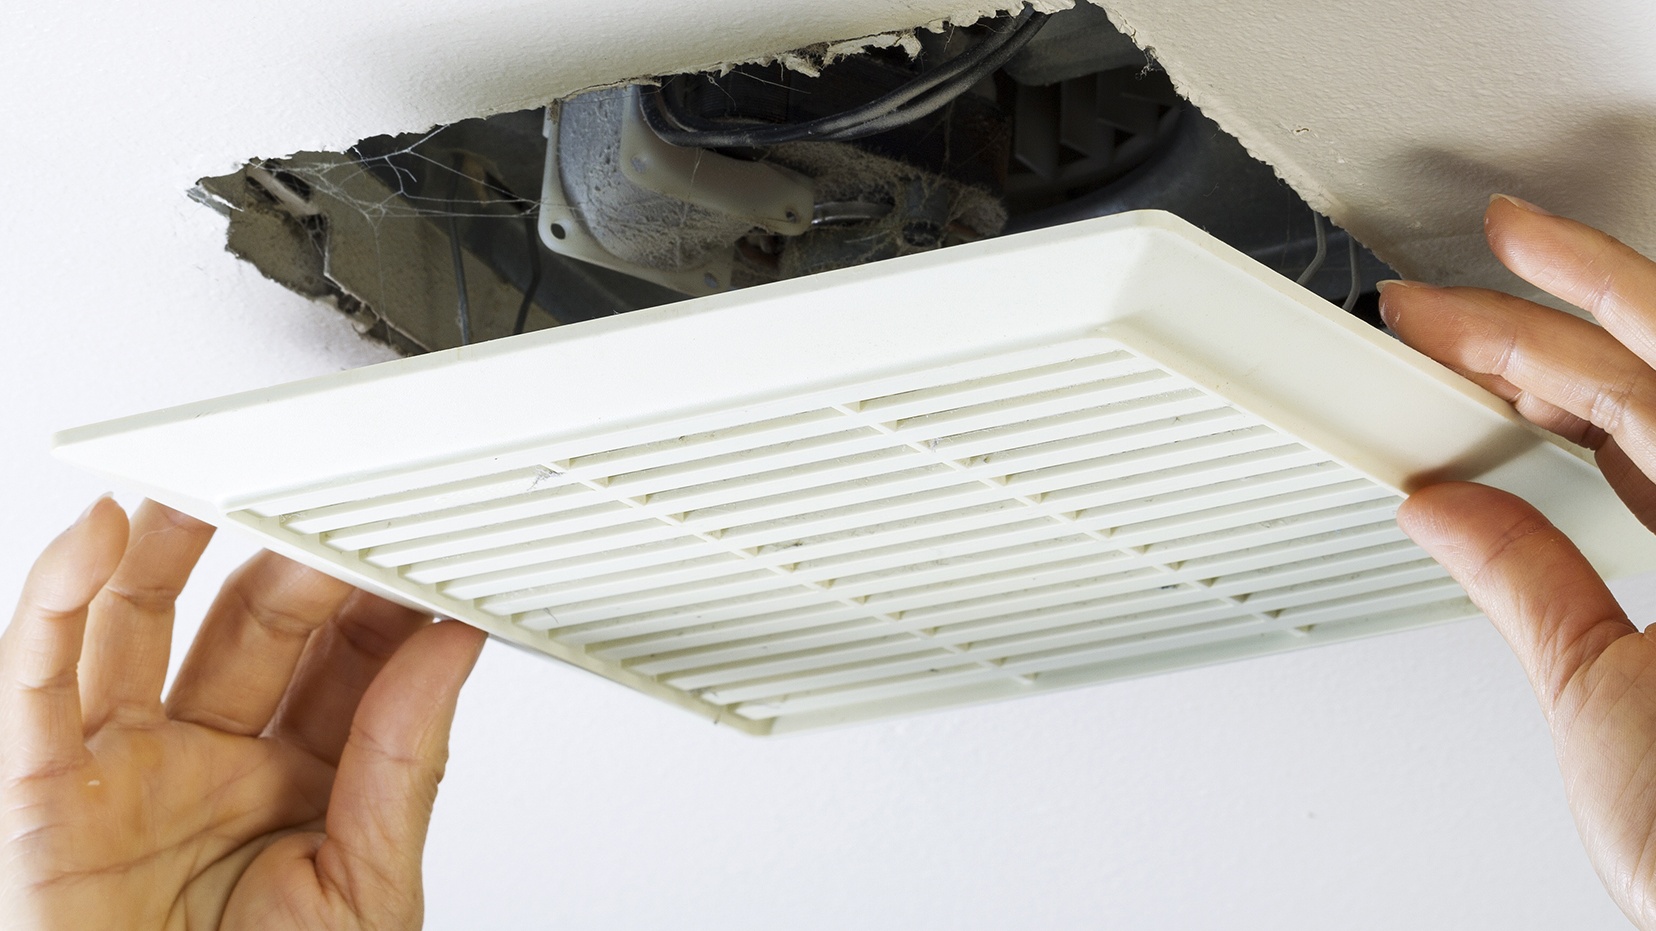 vent-main-new-istock-177047975-tab1962-.cfifgf.-Cropped.jpg